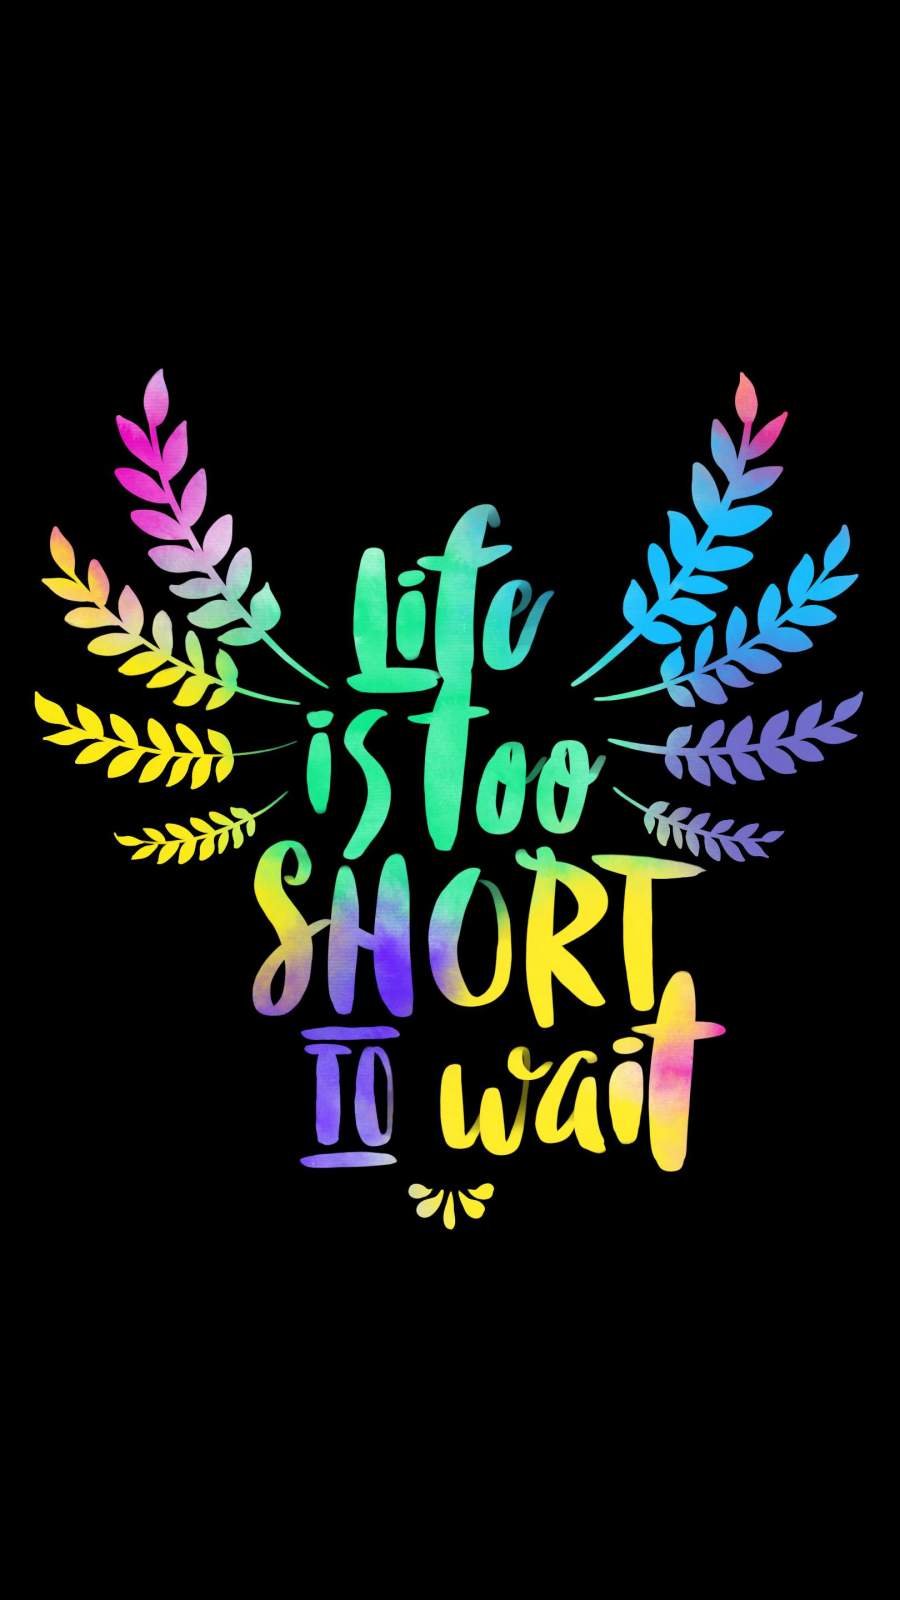 Motivational Wallpaper on Life: Life is Short live your dream and wear -  Dont Give Up World